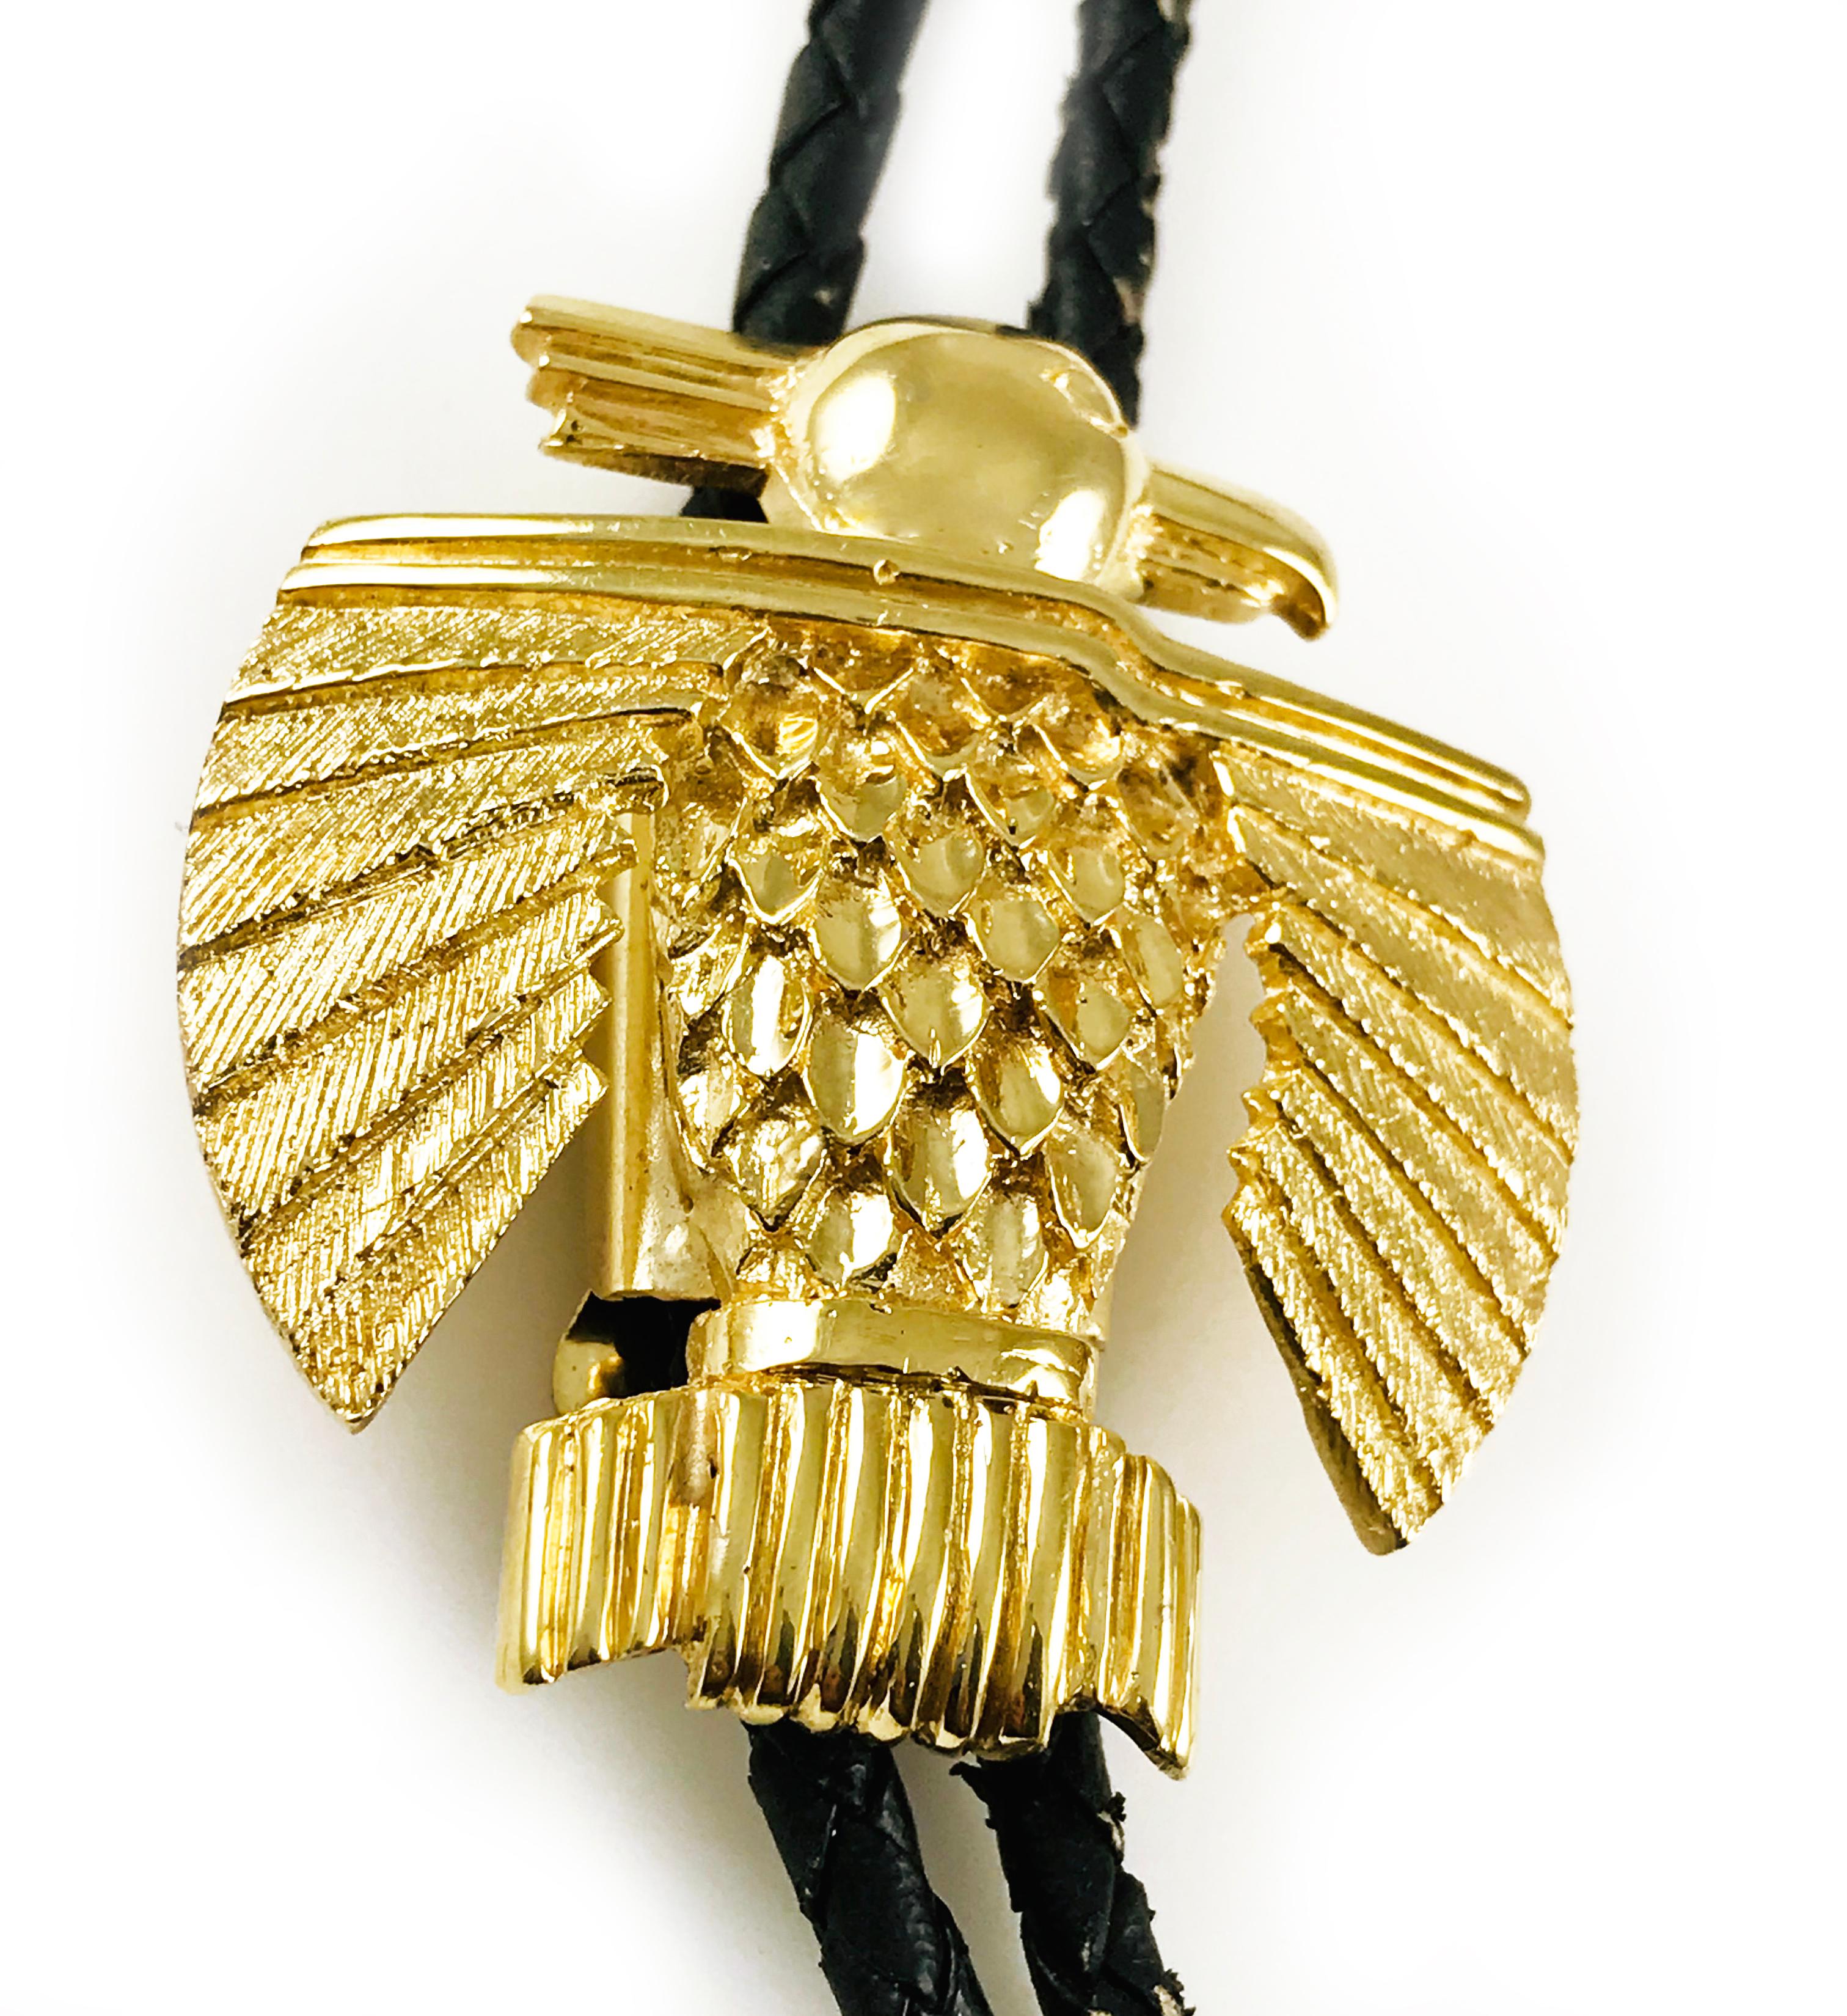 Art Deco-Inspired handmade 14 Karat Yellow Gold Native American Thunderbird Bolo. The black leather cord is 3.5mm wide and shows some wear however, this is a truly stunning piece. The Thunderbird measures 1.75